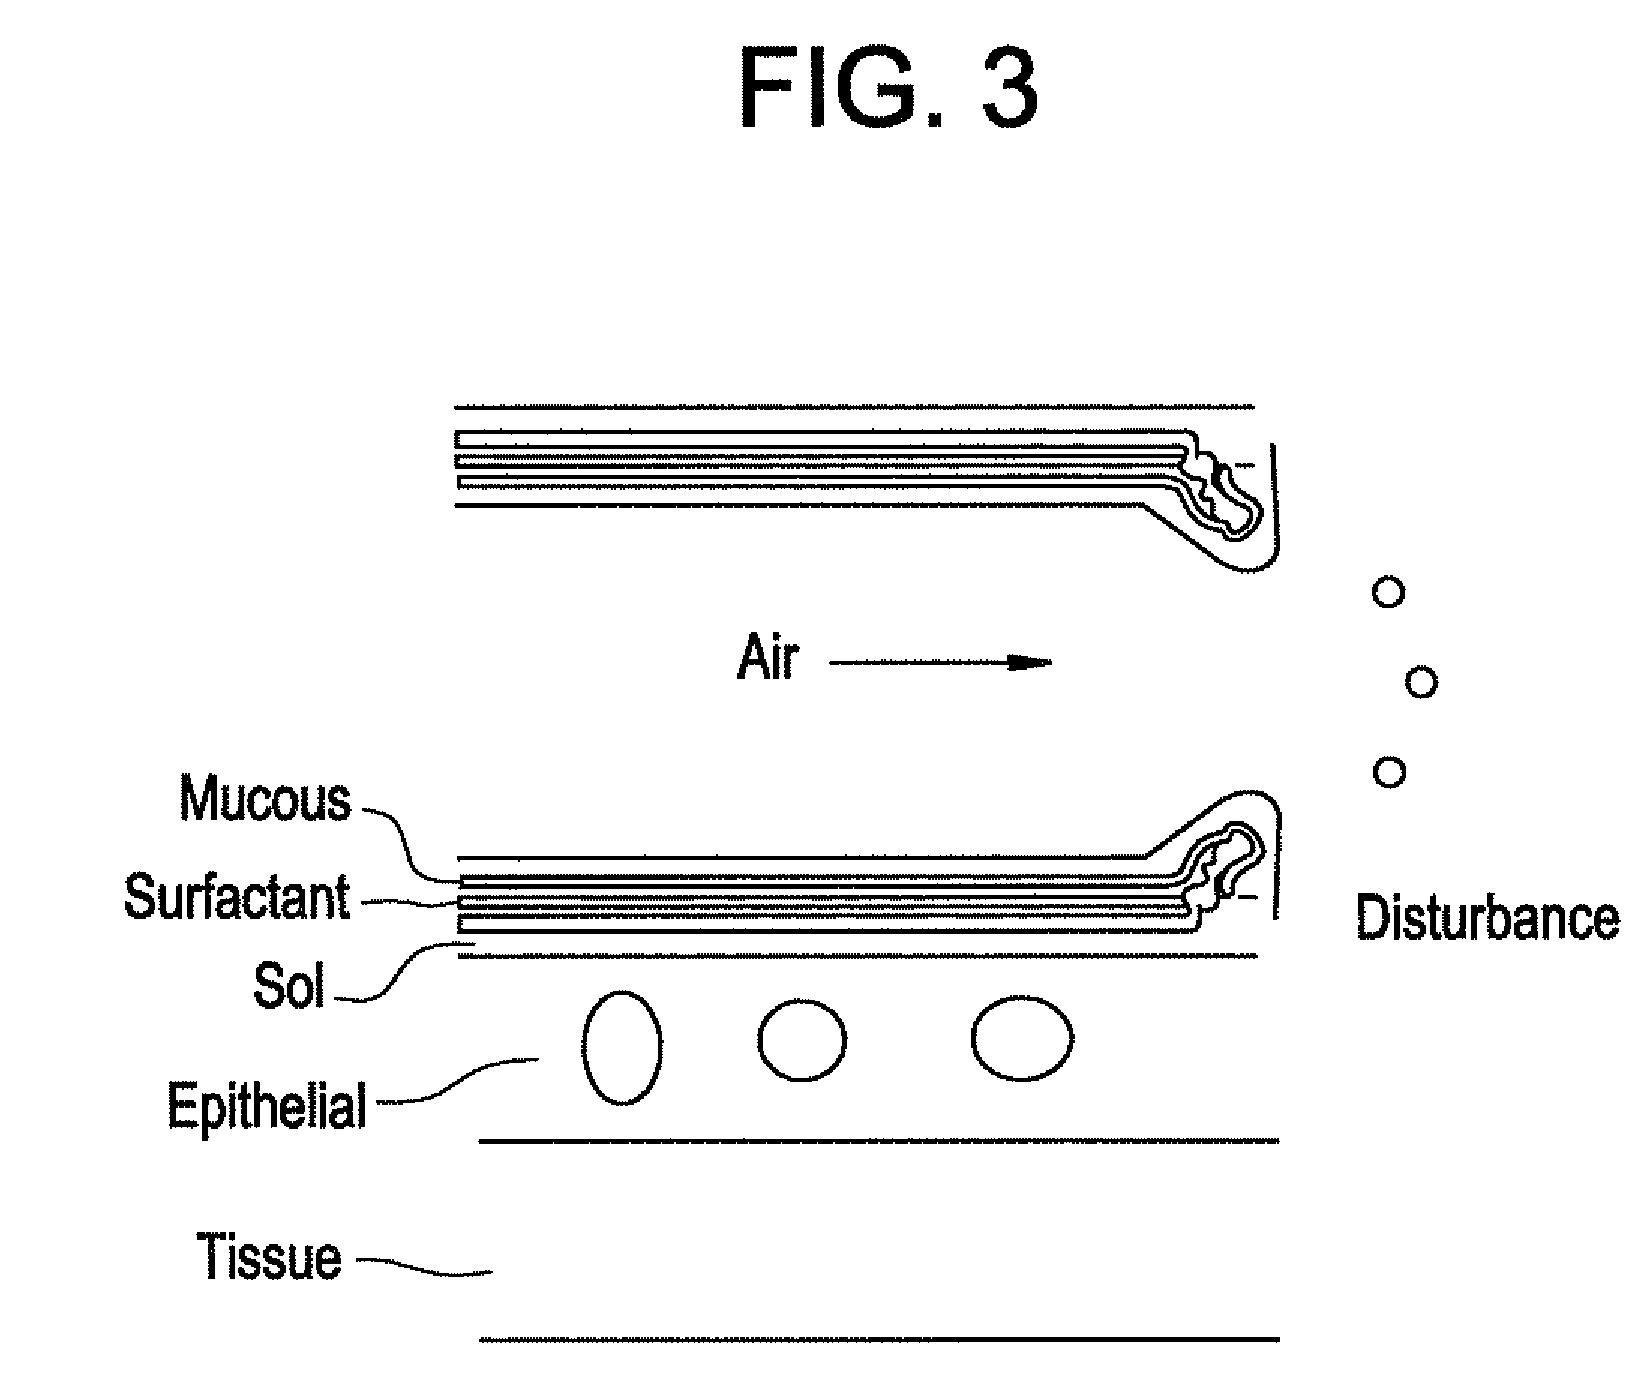 Methods for limiting spread of pulmonary infections